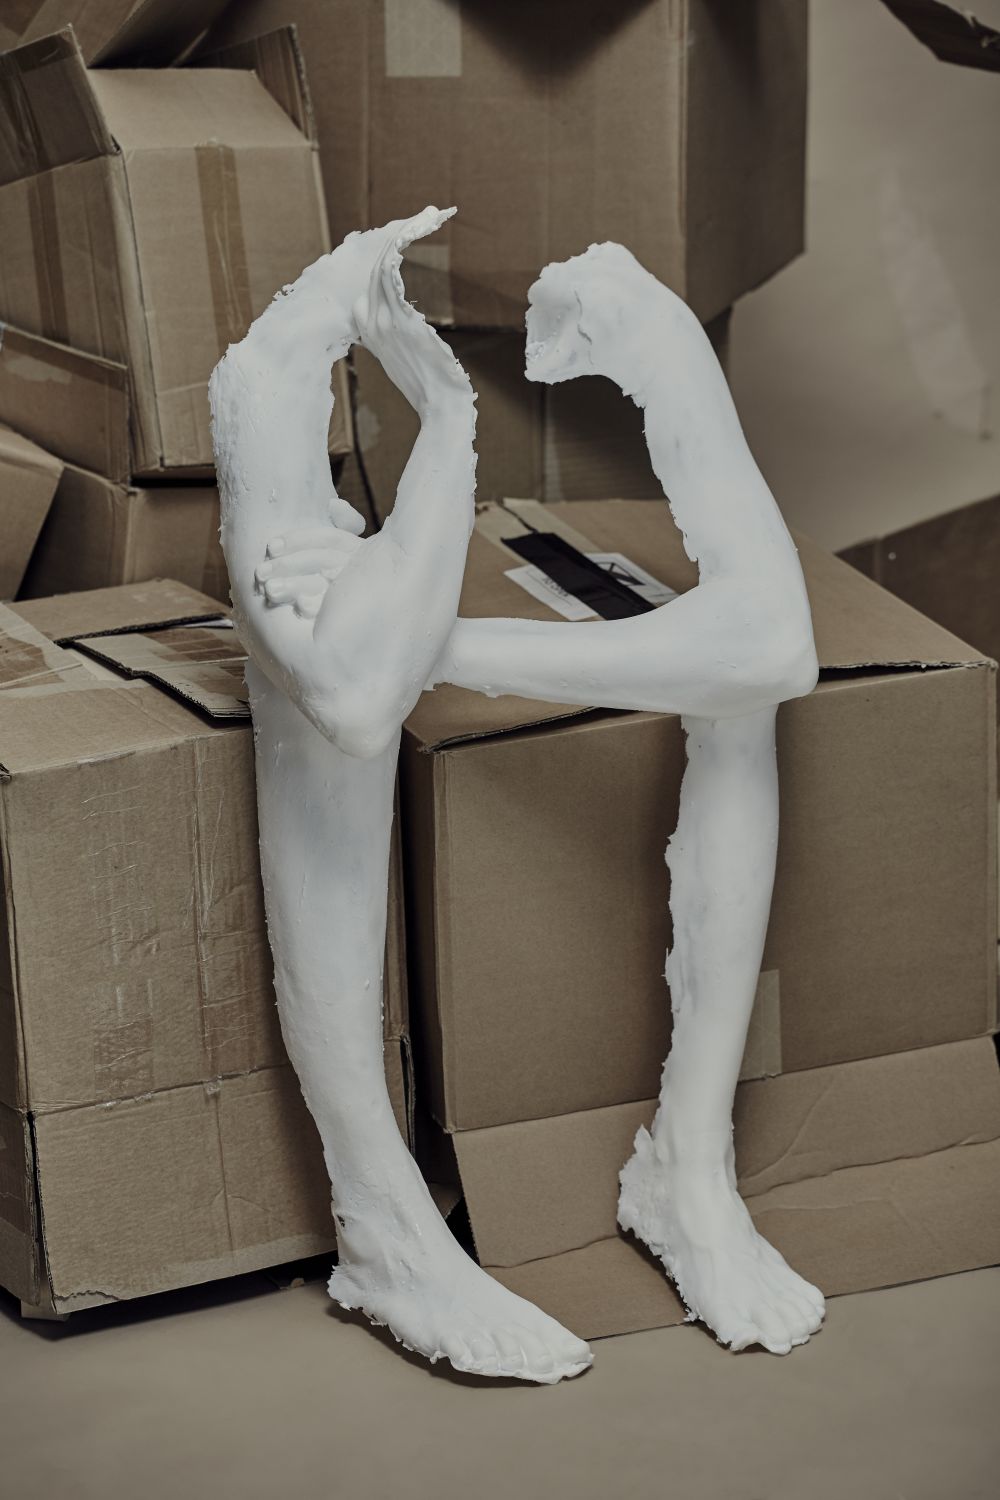 artefact limb cast, crossed arm slumped forward, 'sitting' on a pile of cardboard boxes